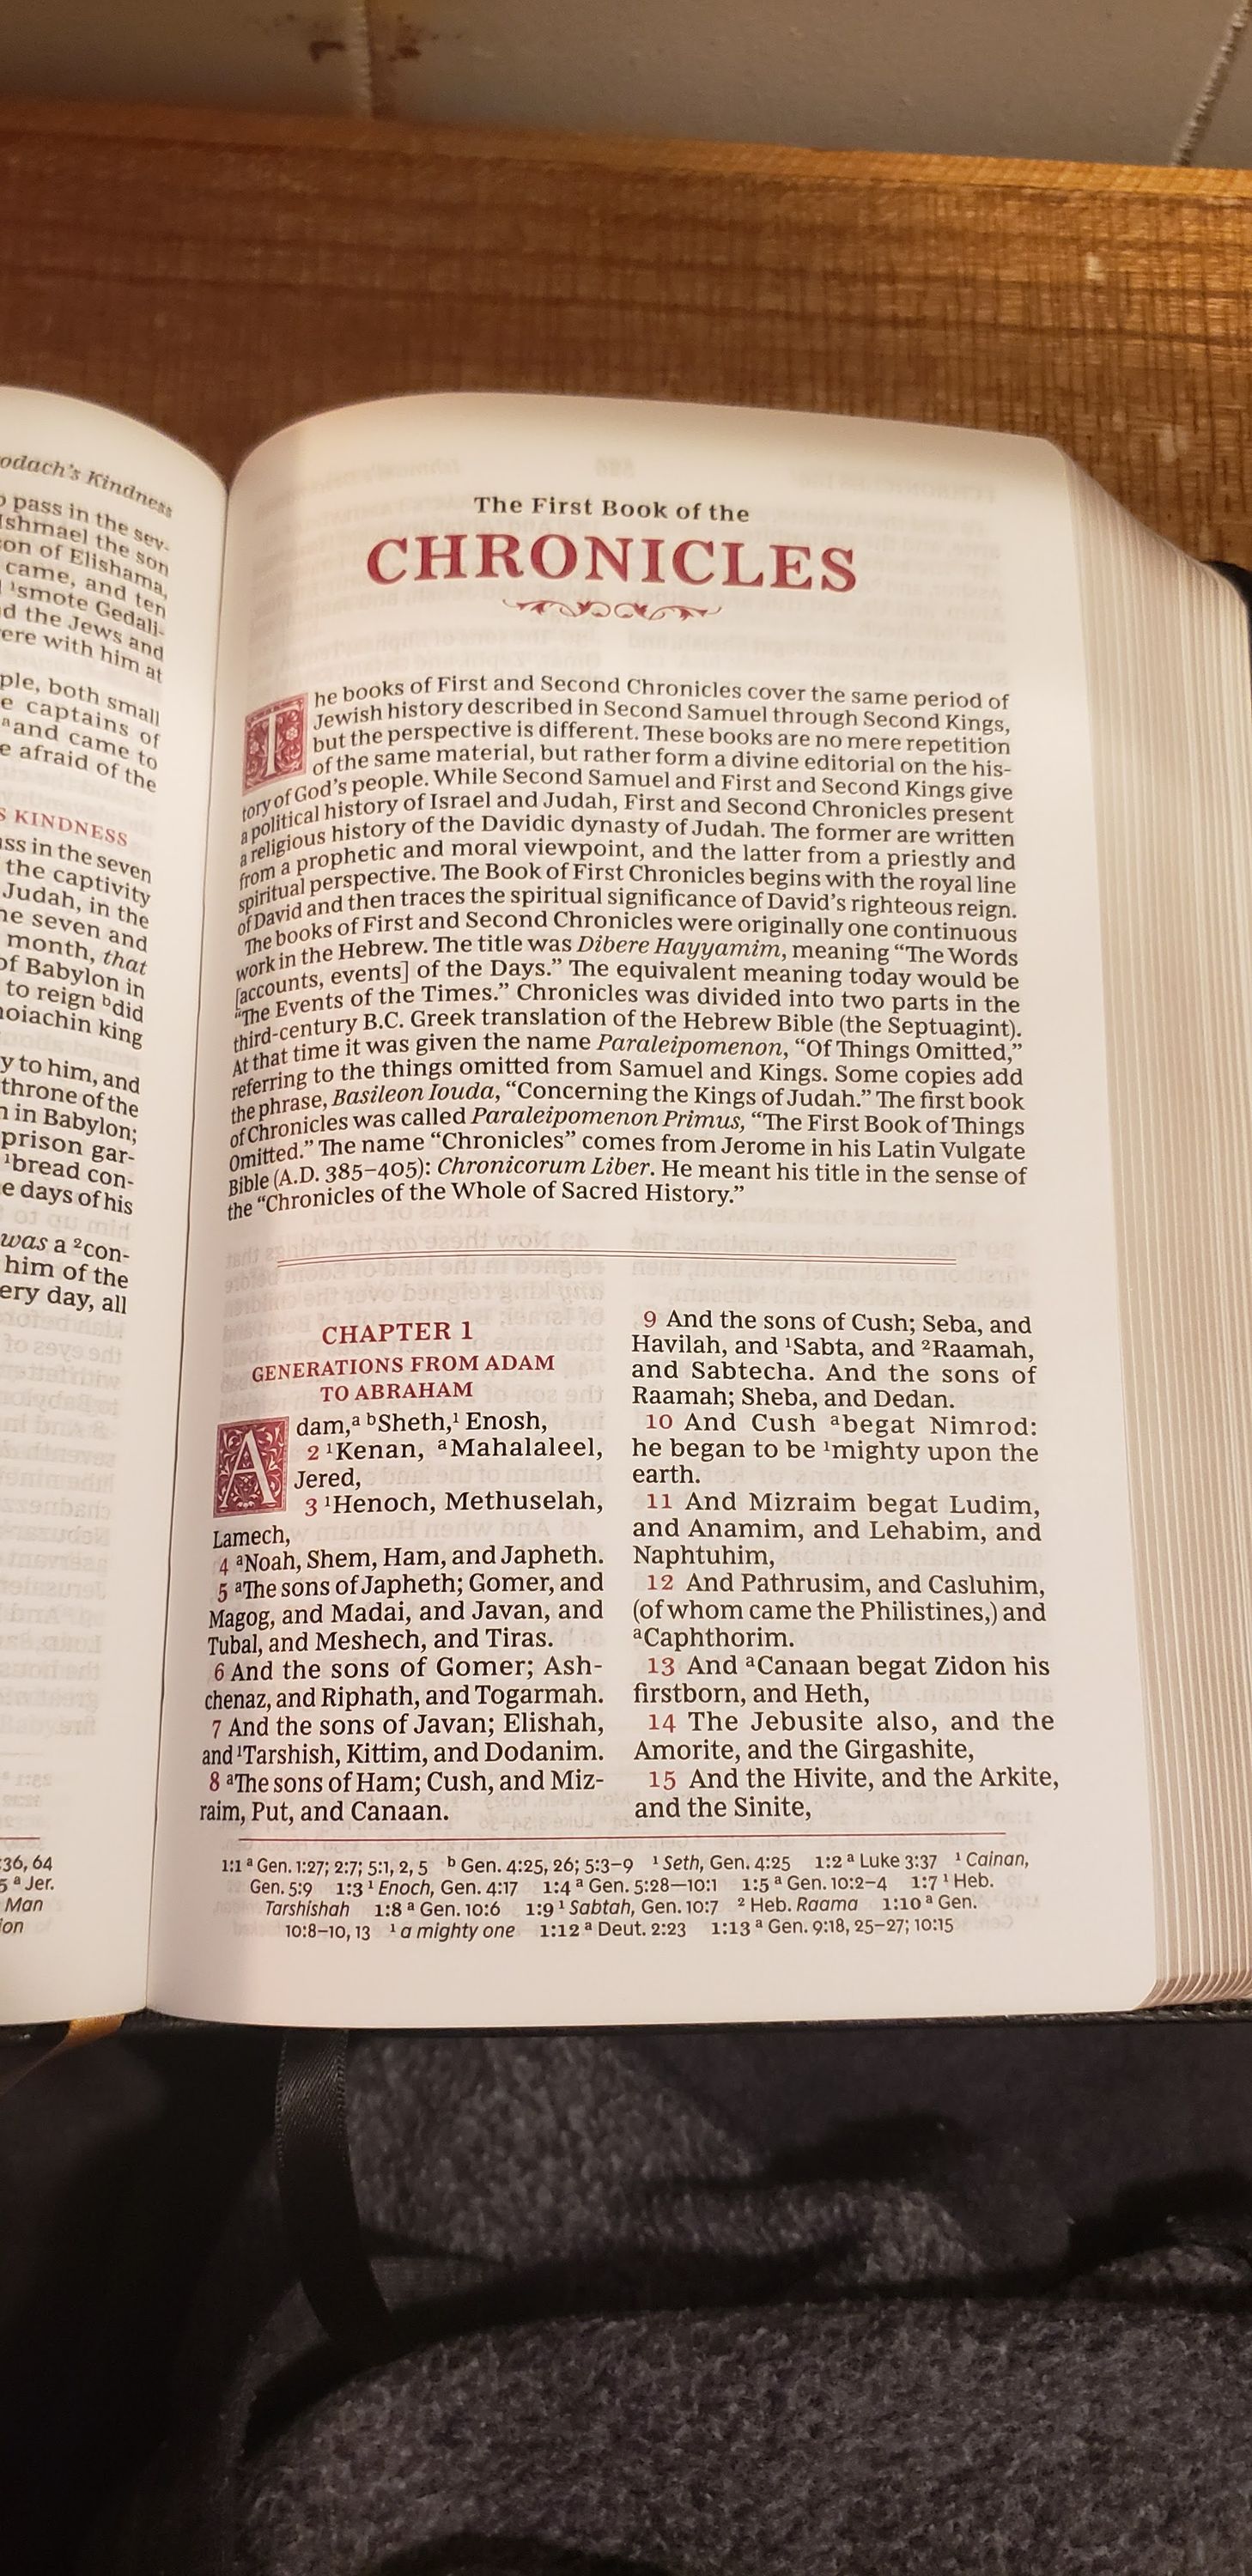 Open bible showing First chronicles